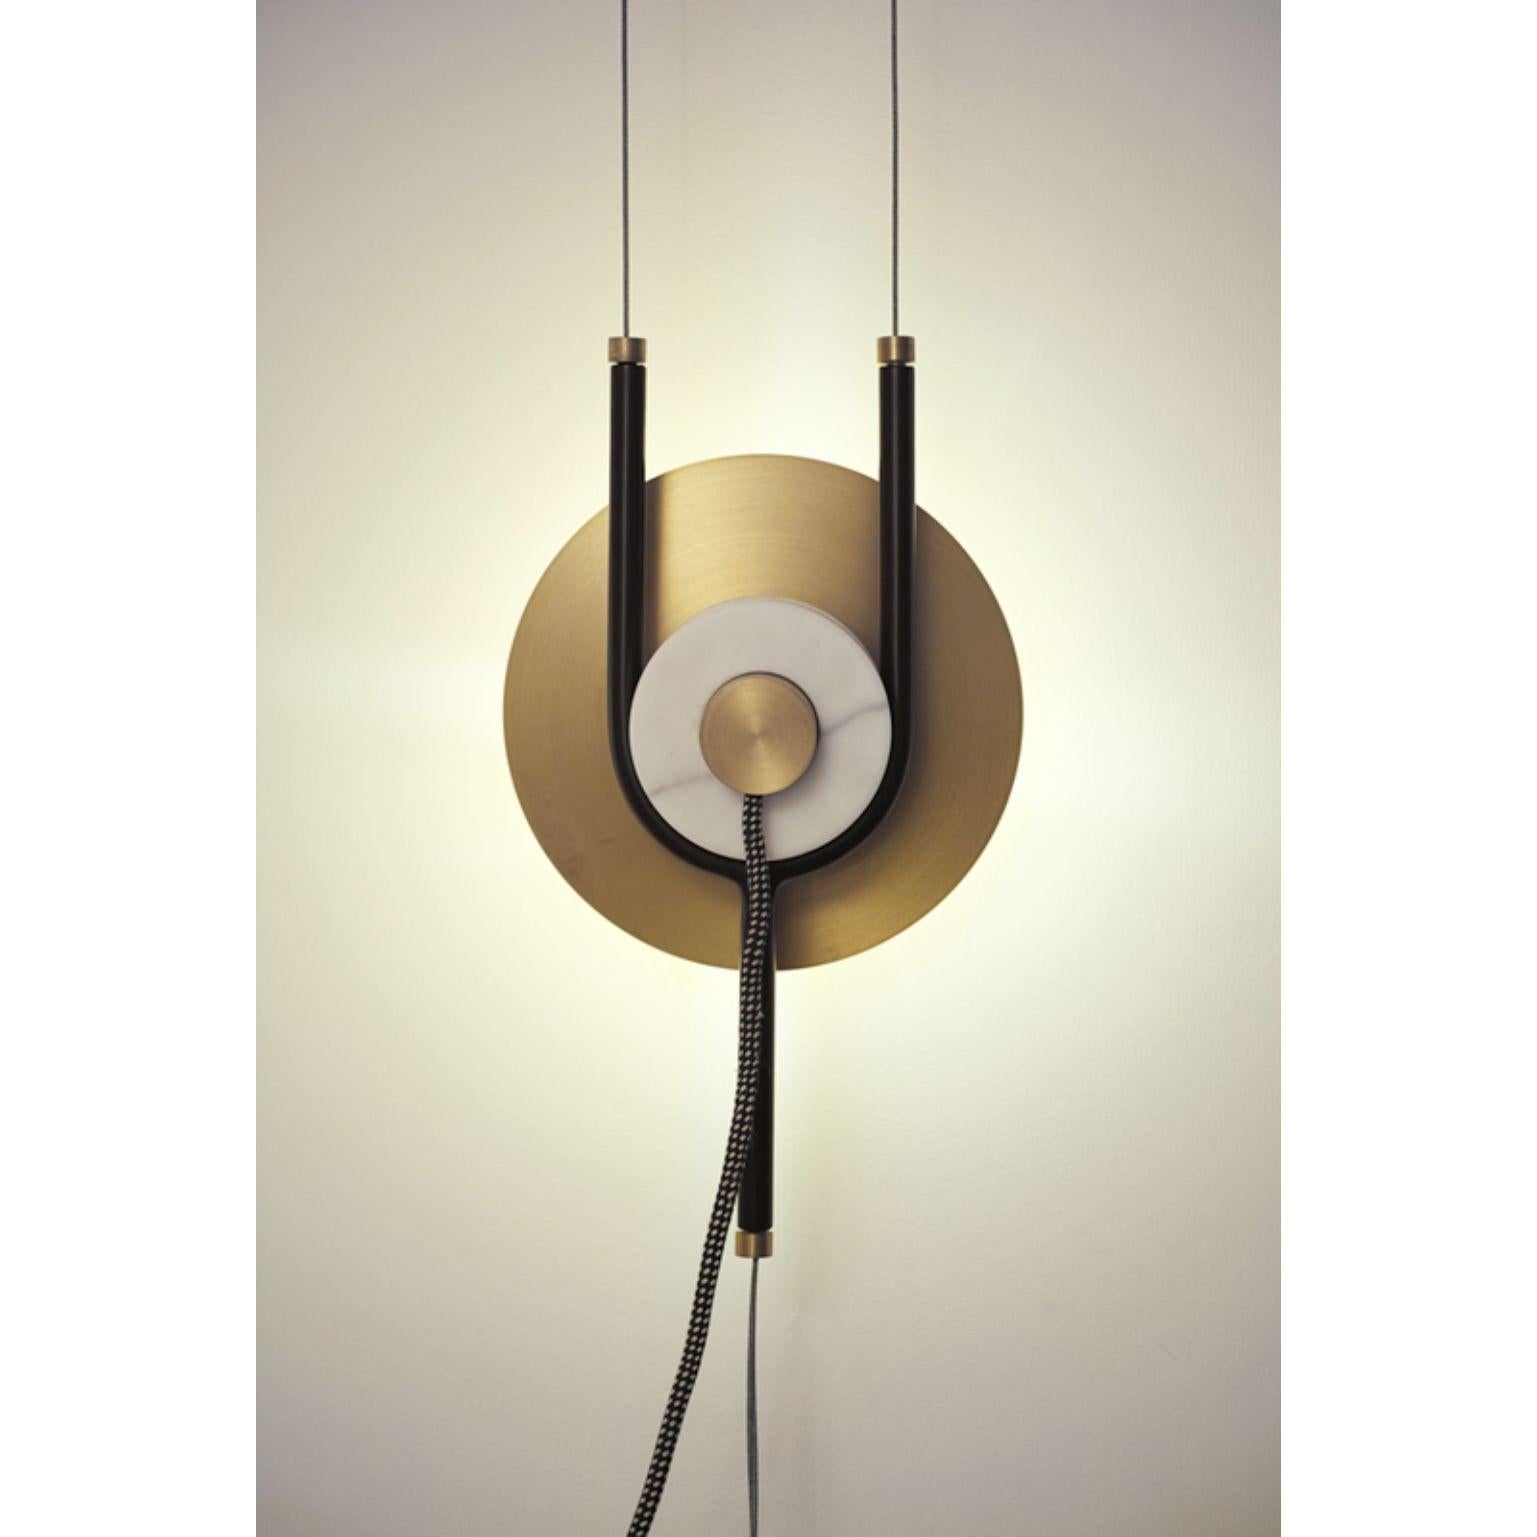 Y lamp - suspension lamp by Marc Dibeh
2015
Materials: Brass, black painted steel, carrara marble
Dimensions: W20 x H40 x D7 cm 

All our lamps can be wired according to each country. If sold to the USA it will be wired for the USA for